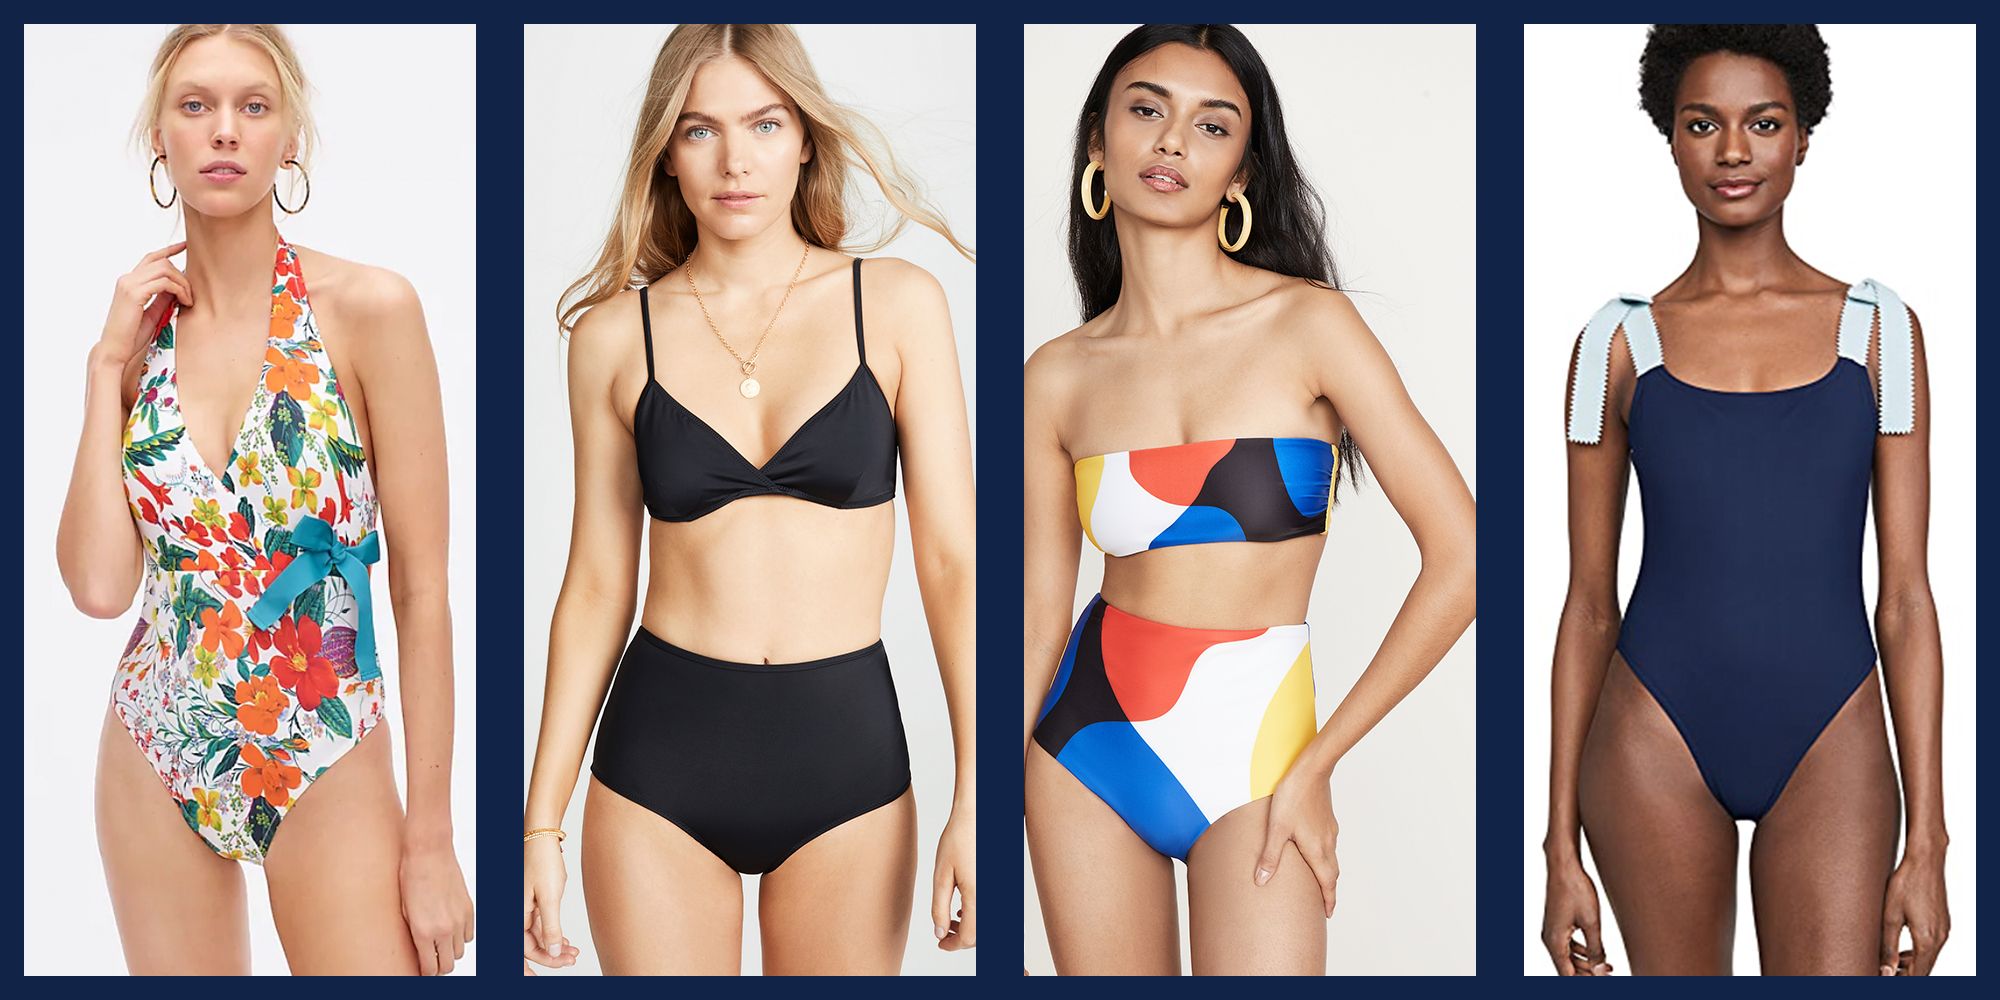 15 Best Women's Swimsuits 2022 - Flattering Bathing Suits in All